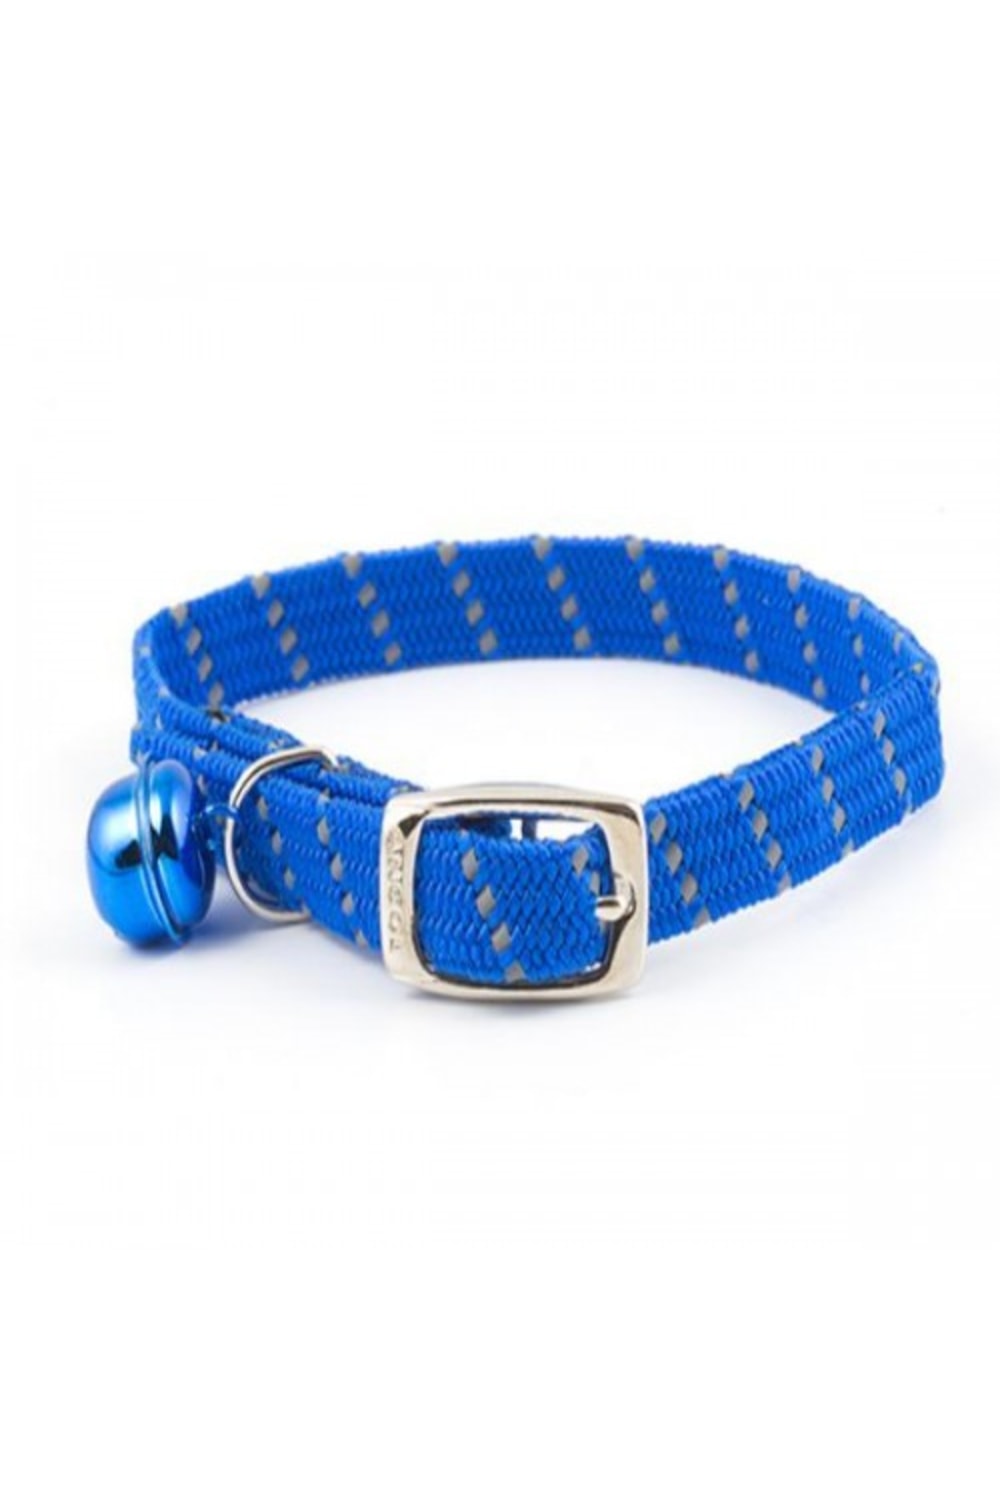 Ancol Softweave Cat Collar (Blue) (One Size)